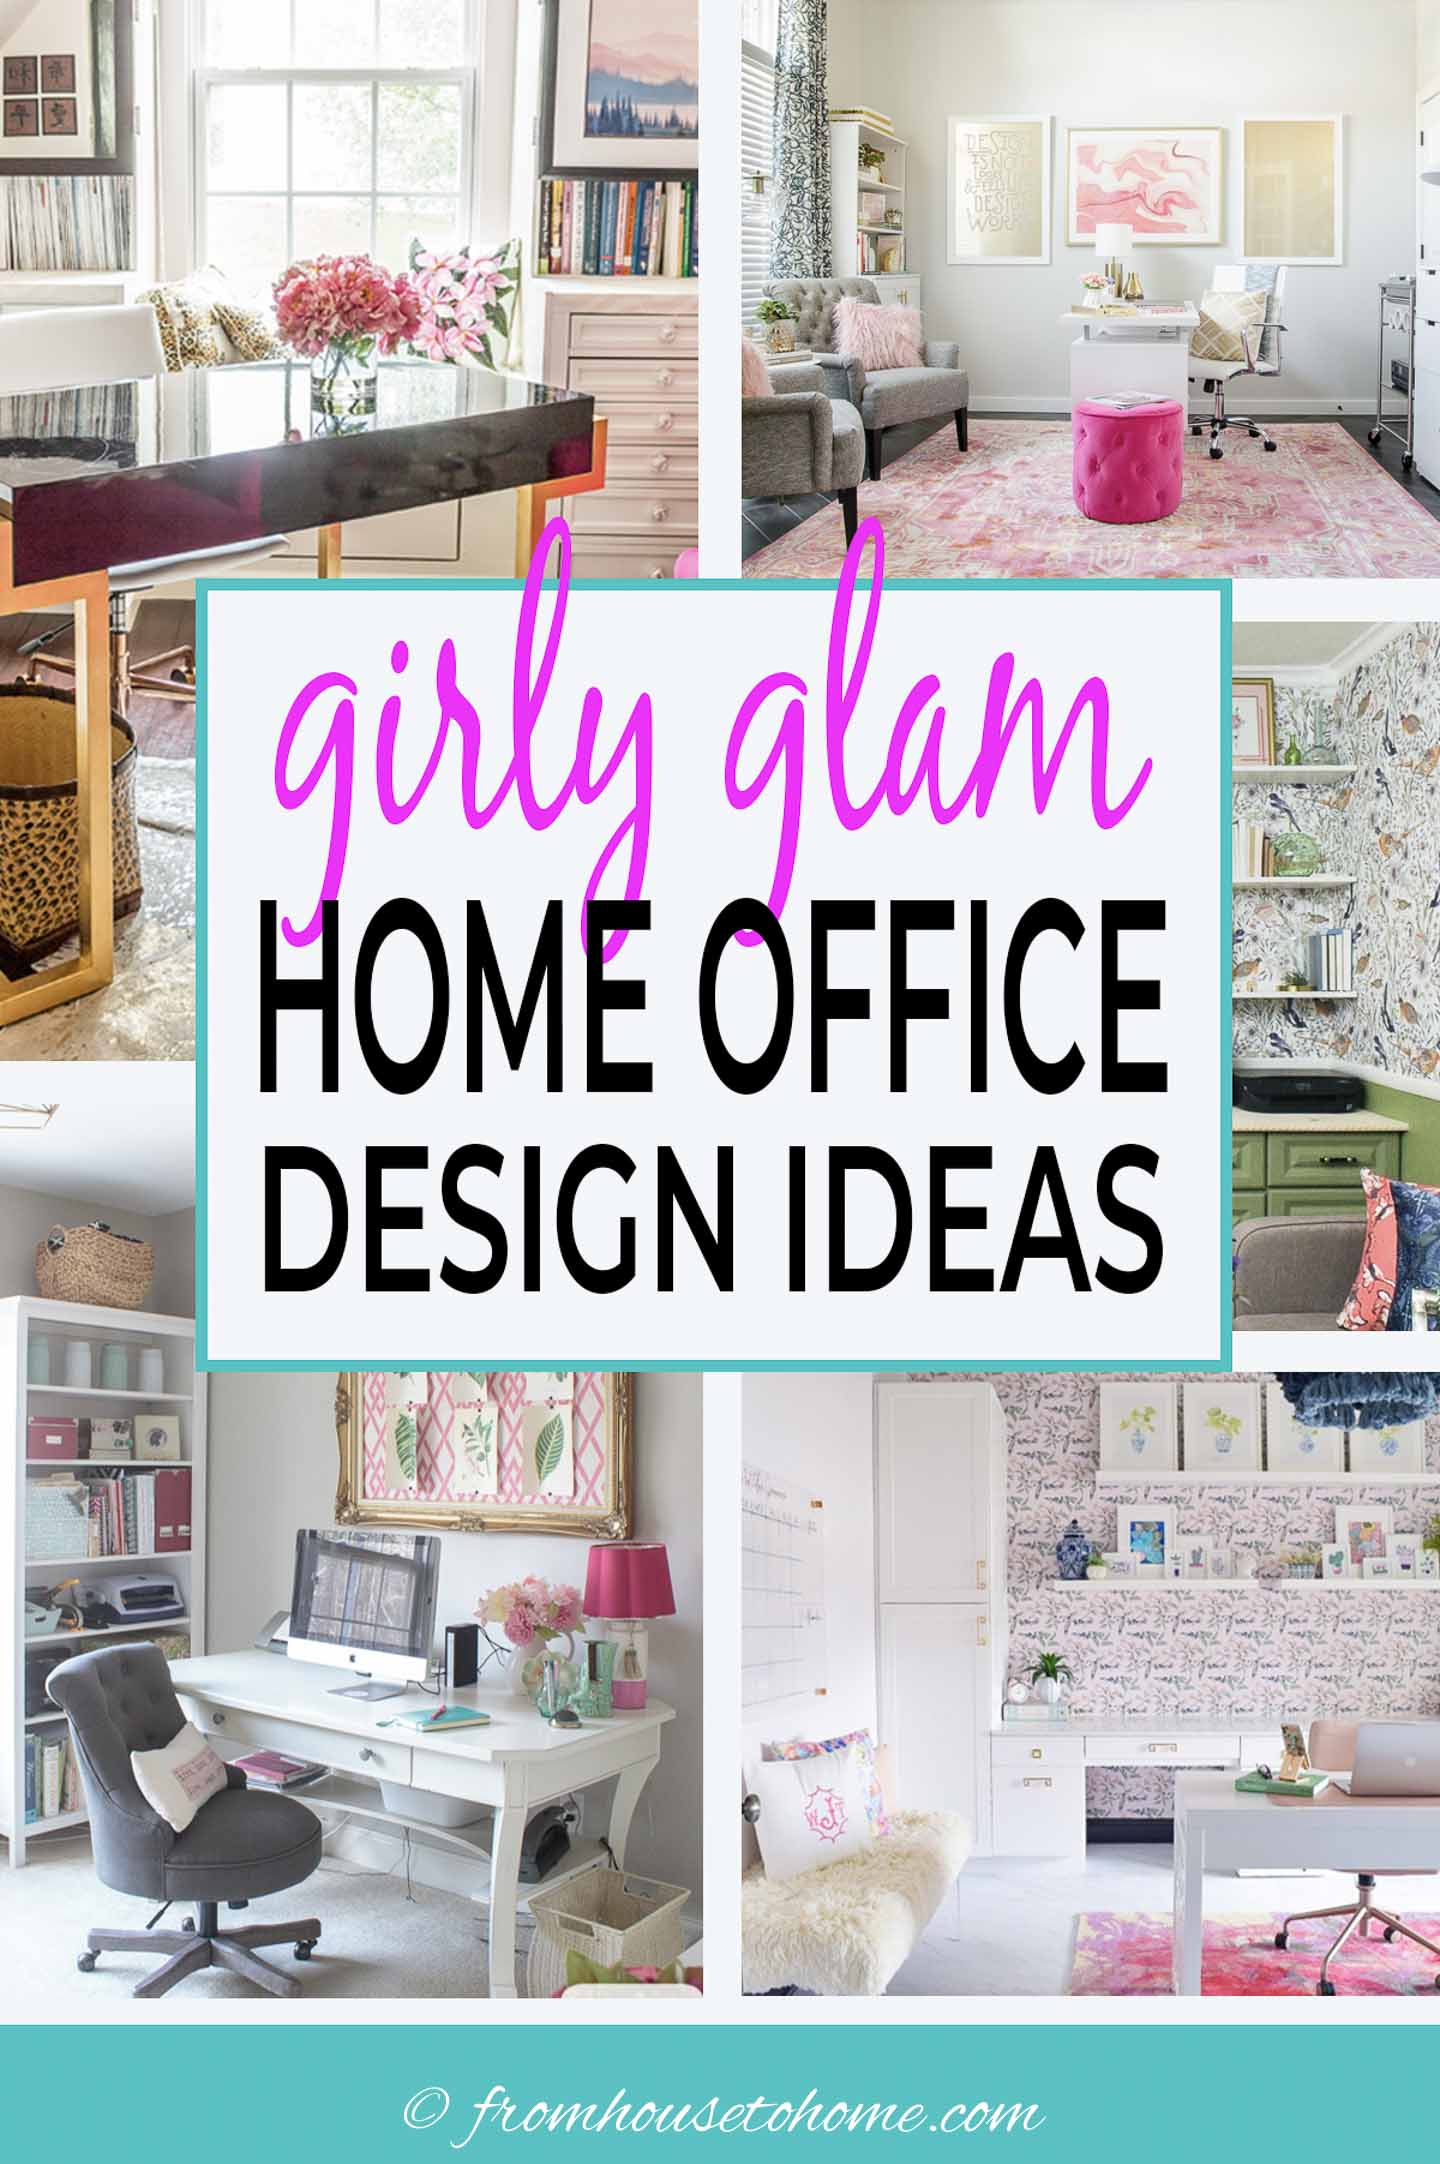 Girly glam home office design ideas